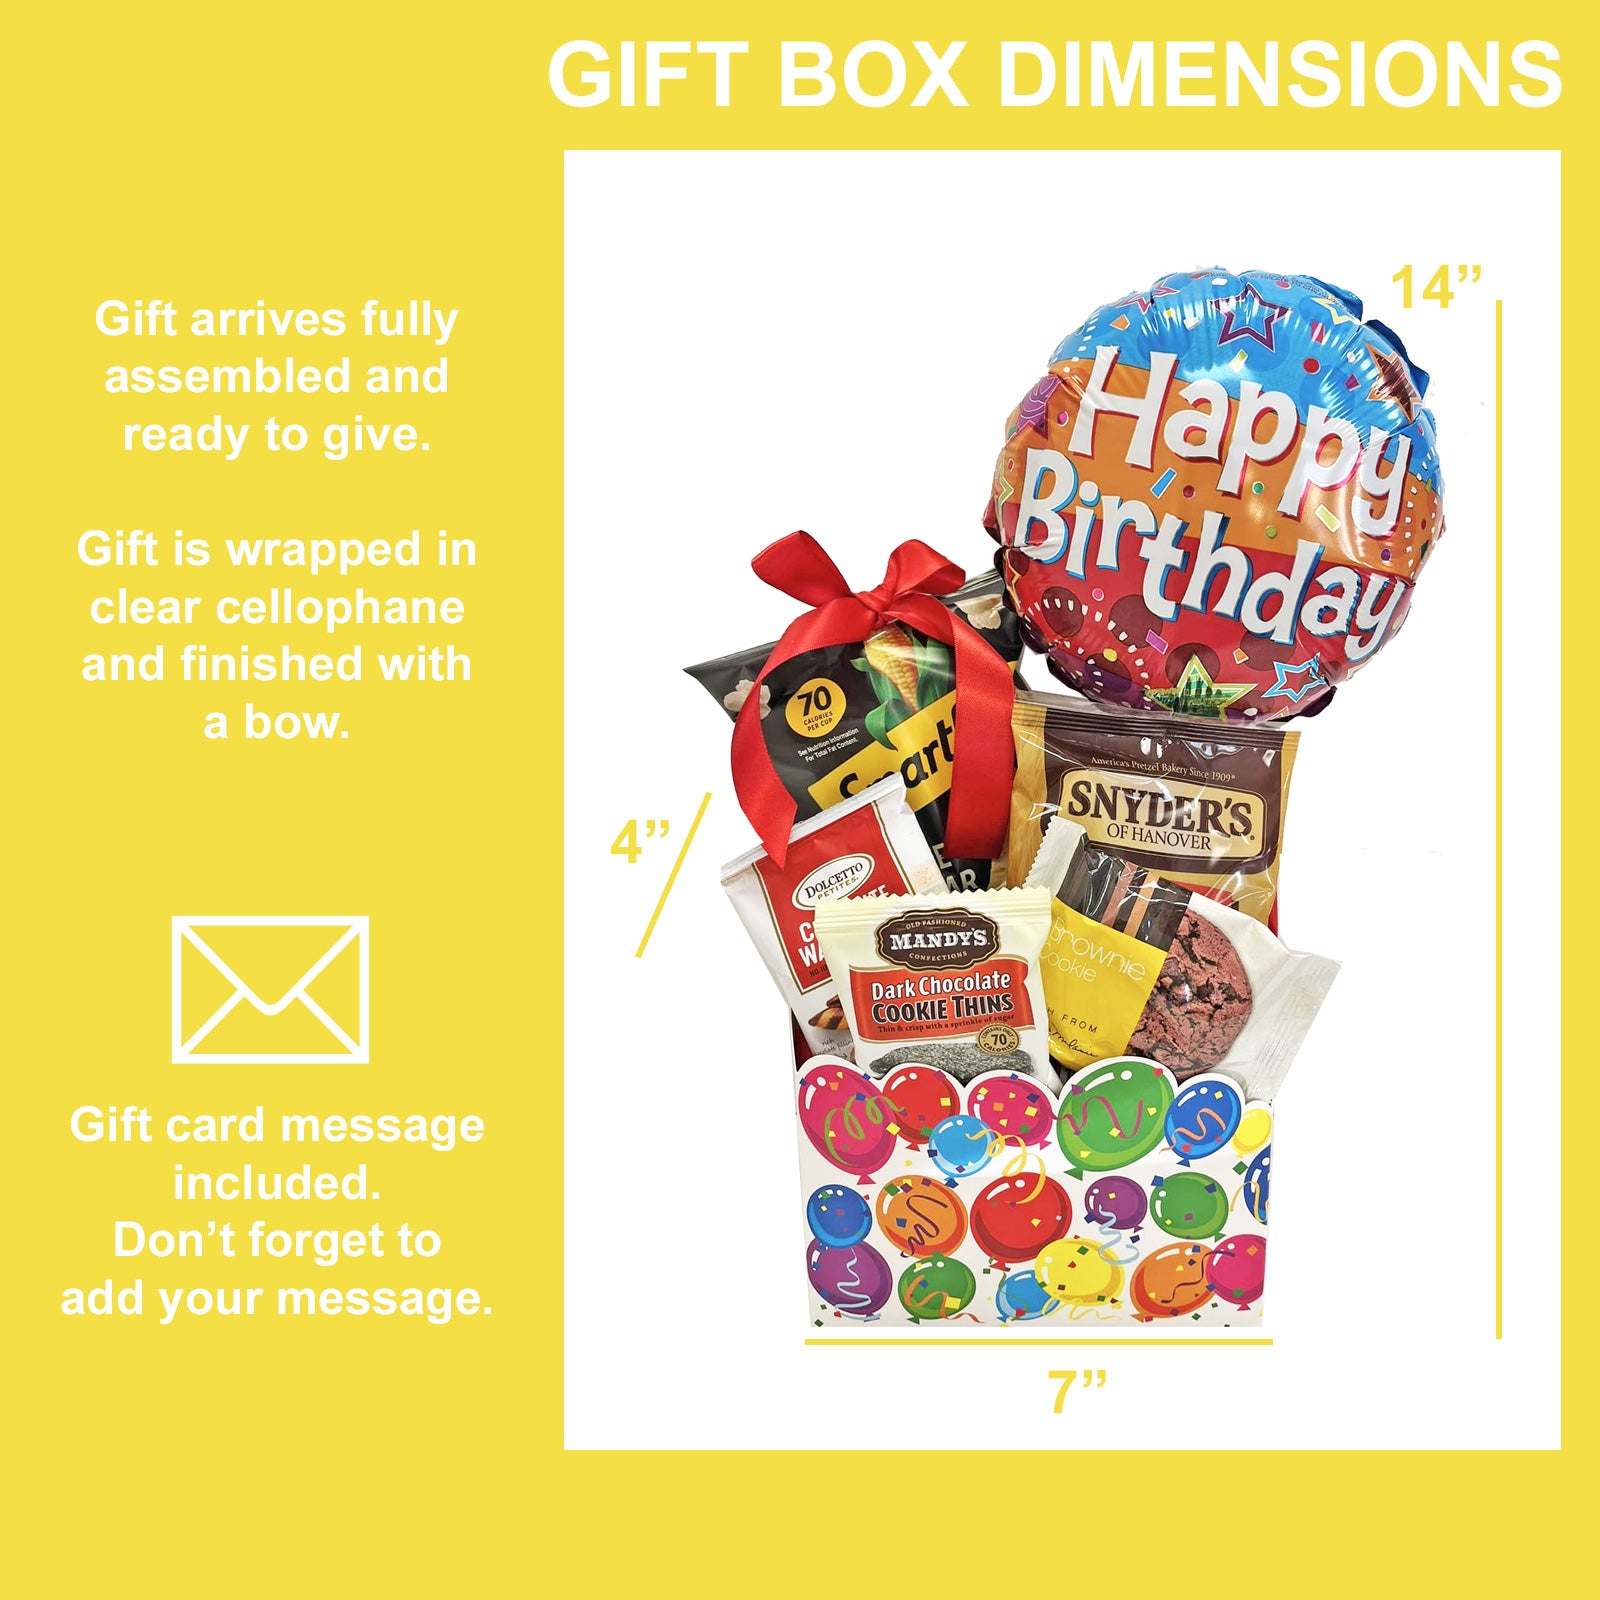 Birthday Gift Box with Cookies and Snacks and Happy Birthday Balloon for Men, Women, Friends and Family Unisex Birthday Gift